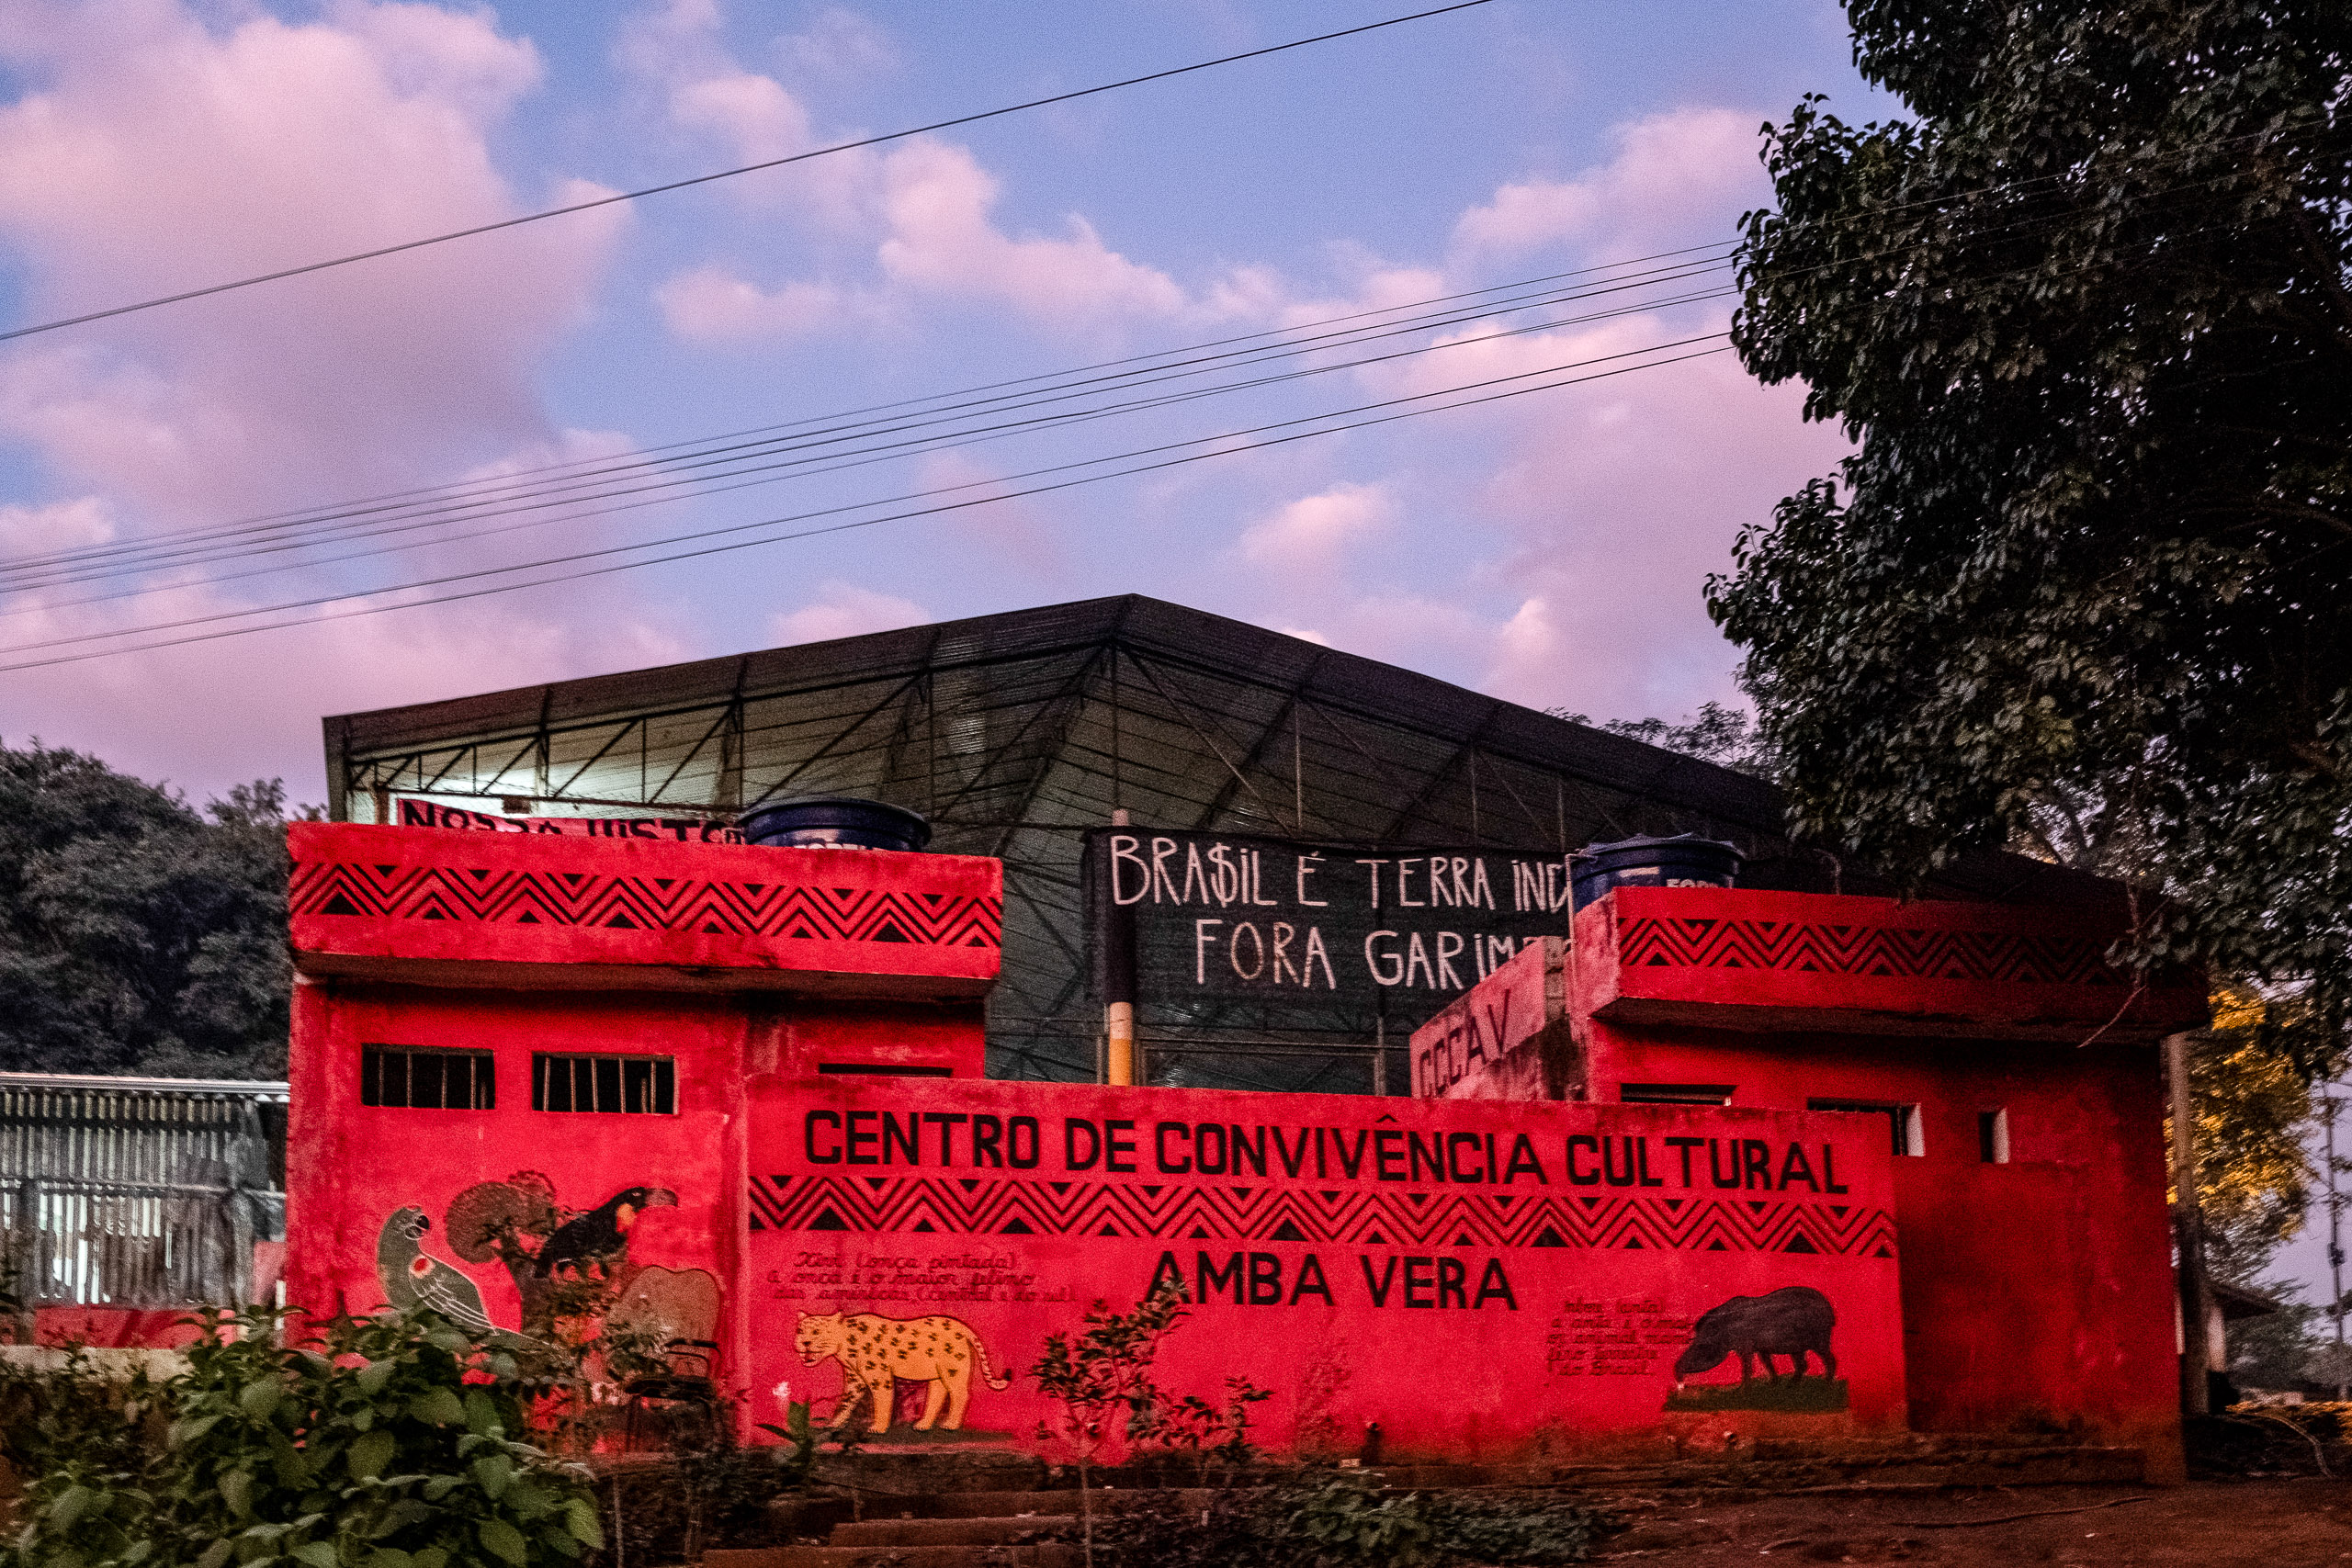 A red building with writing on the outside